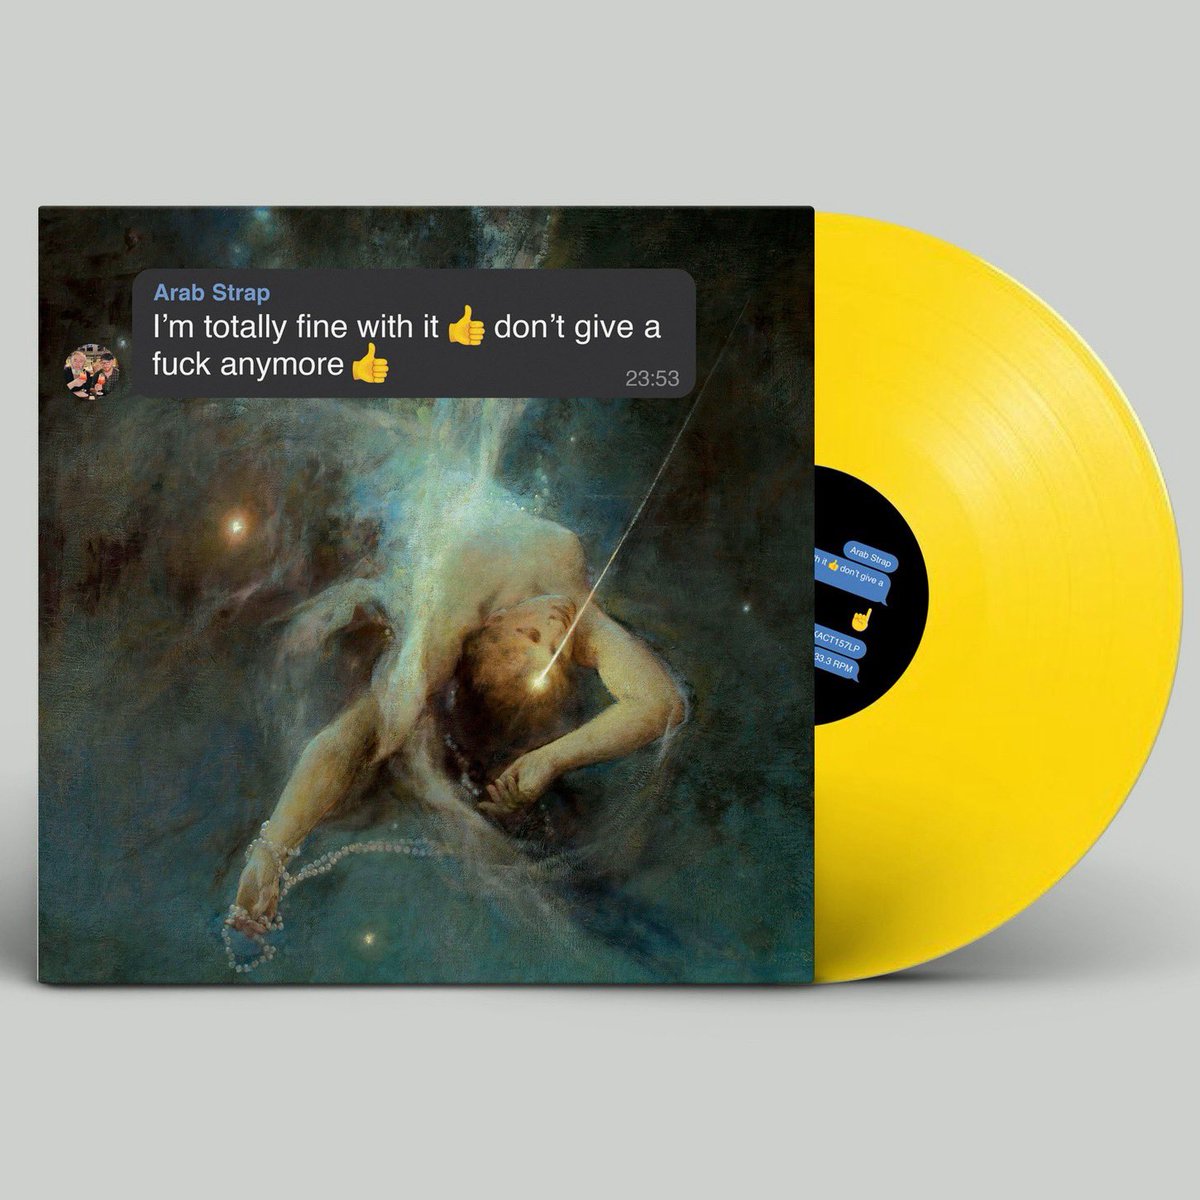 .@arabstrapband album launch/LP pre-order bundles available now from @monorail_music ✨ Only Emoji Yellow LP and CD bundles remaining - pre-order yours now as a bundle with tix to the live album launch at @monoglasgow on release day (Fri 10 May) 👍 ➡ bit.ly/3JBBtxE